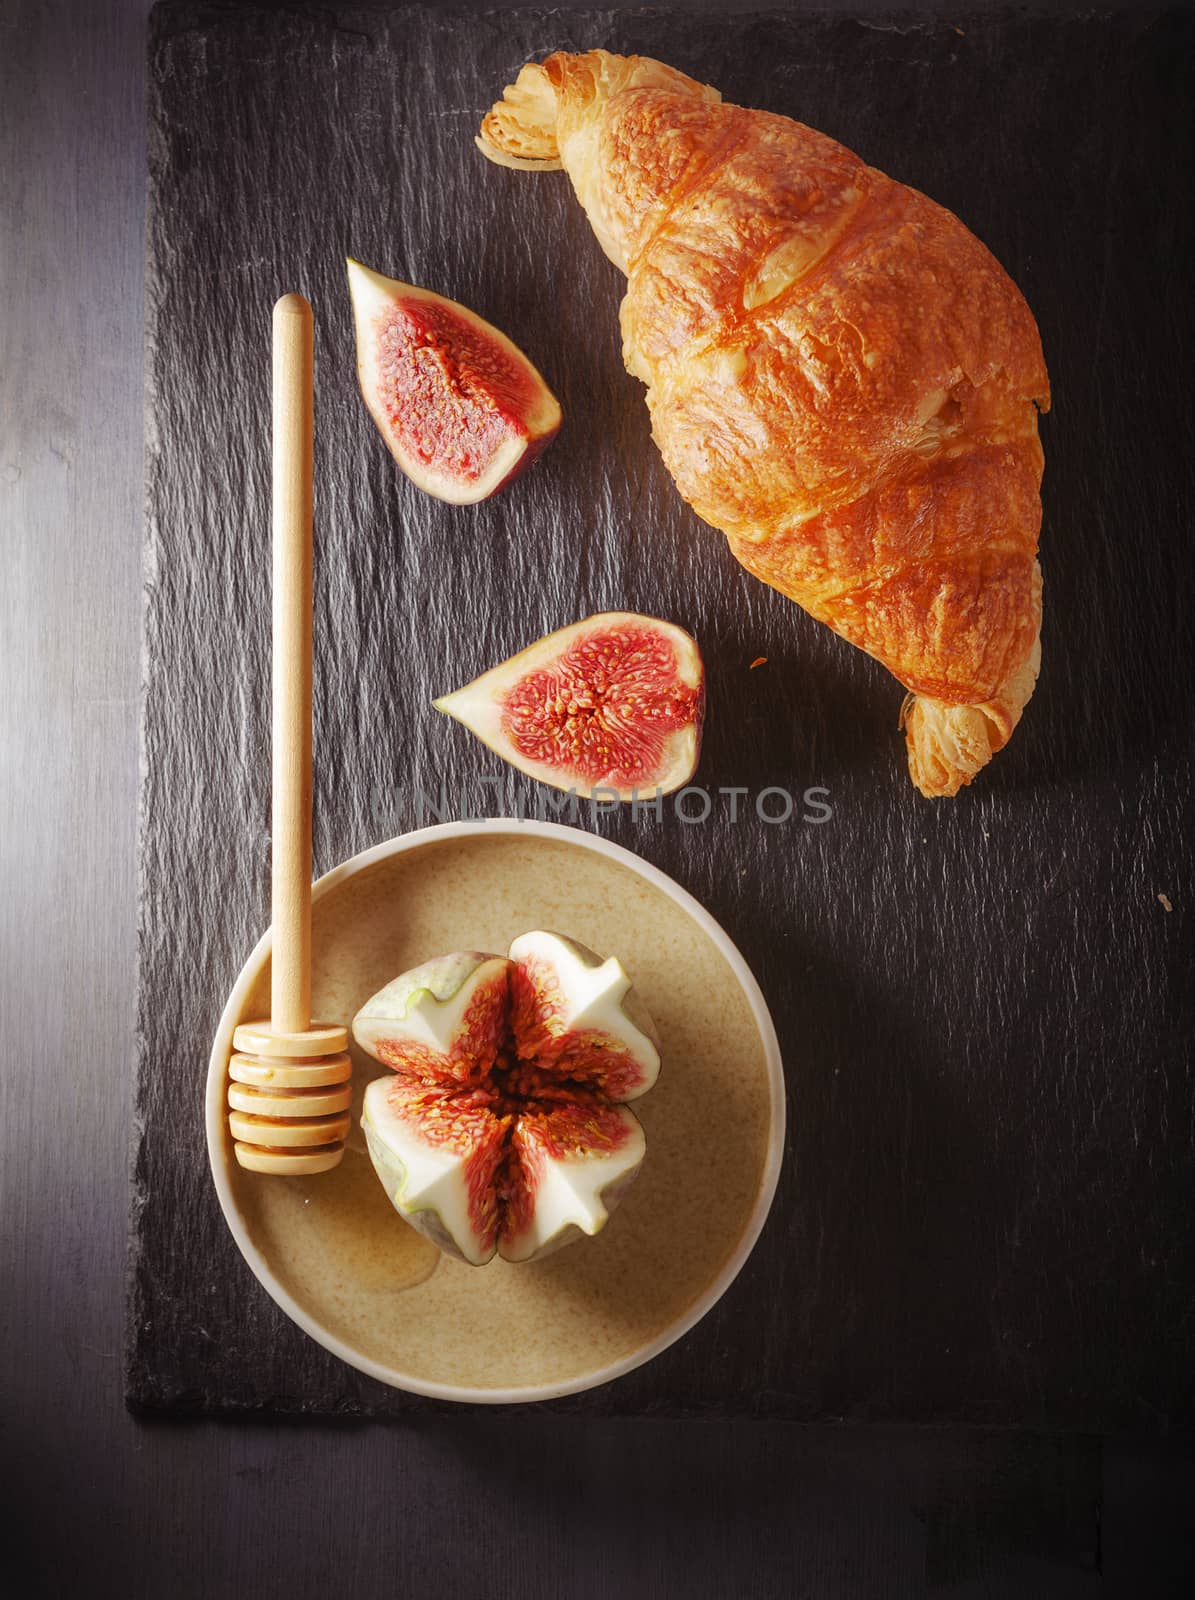 Croissant and figs on a stone plate by supercat67